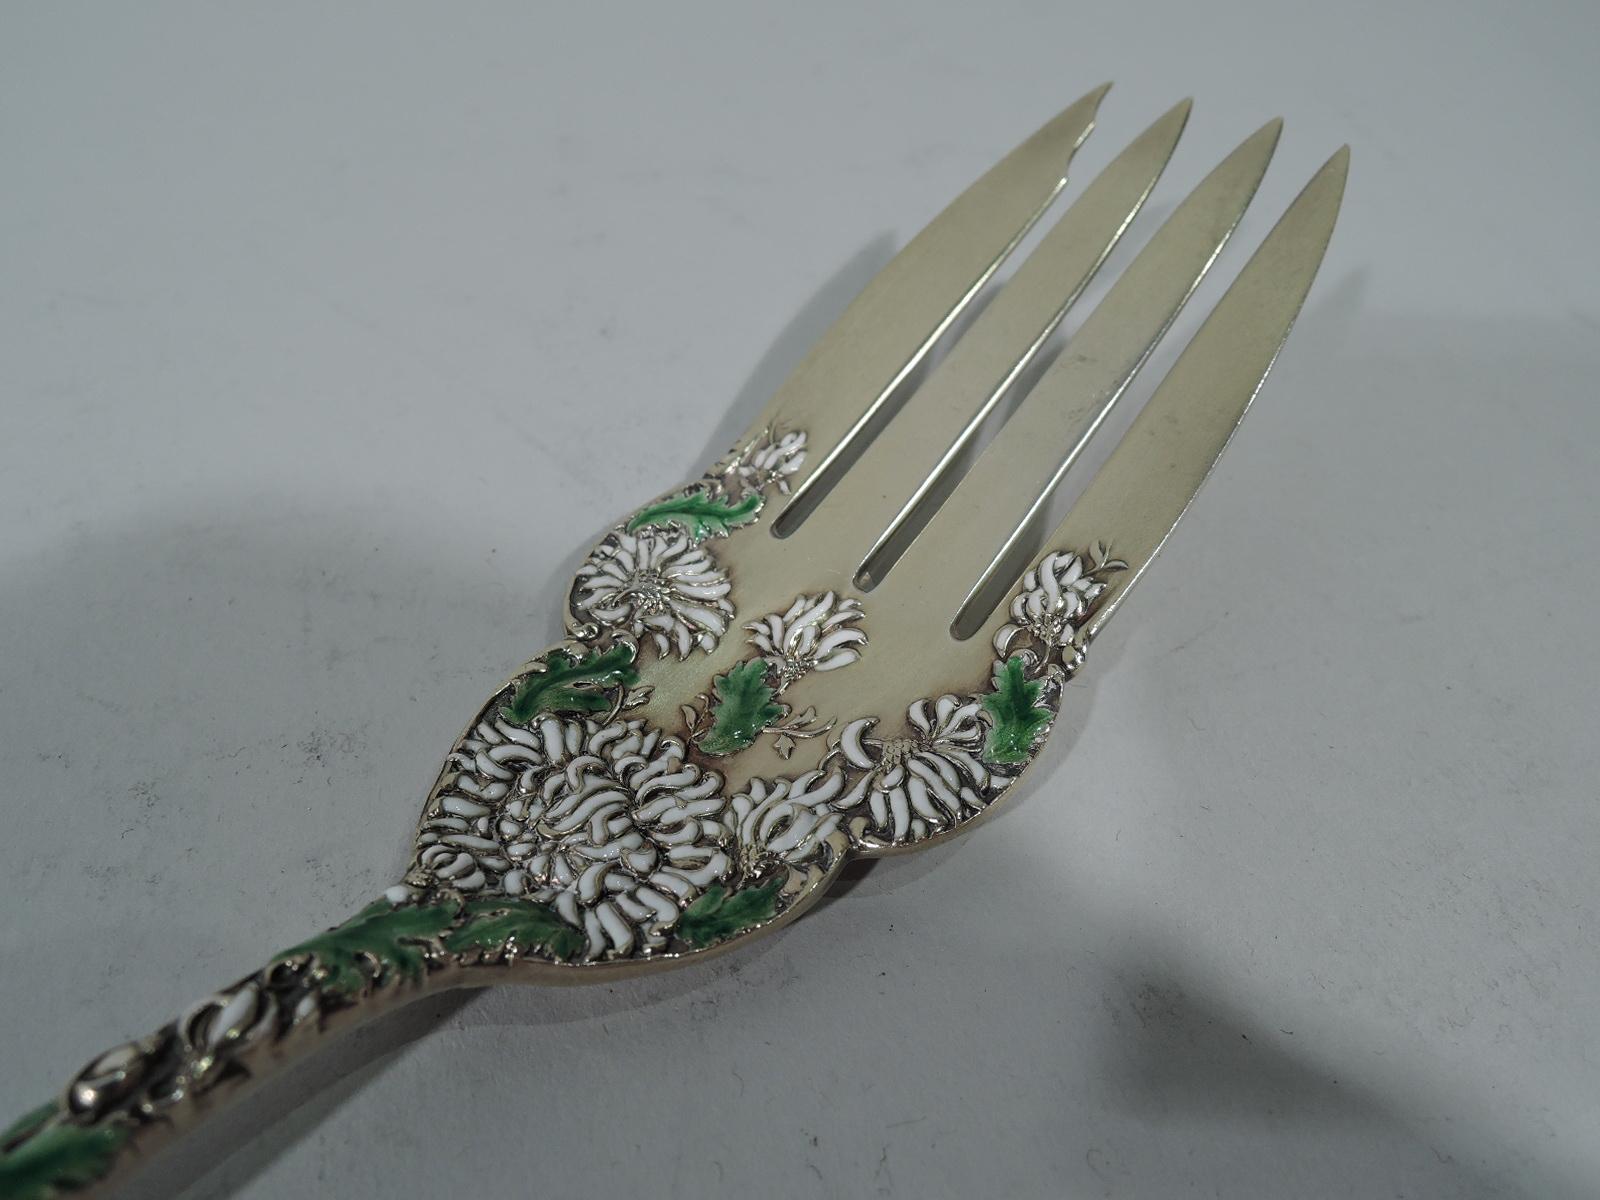 Antique Japonesque gilt sterling silver and enamel serving fork in Chrysanthemum pattern. Made by Durgin in Concord, New Hampshire. Tapering handle with round terminal and narrow scalloped shank with 4 tines. Raised double-sided ornament comprising